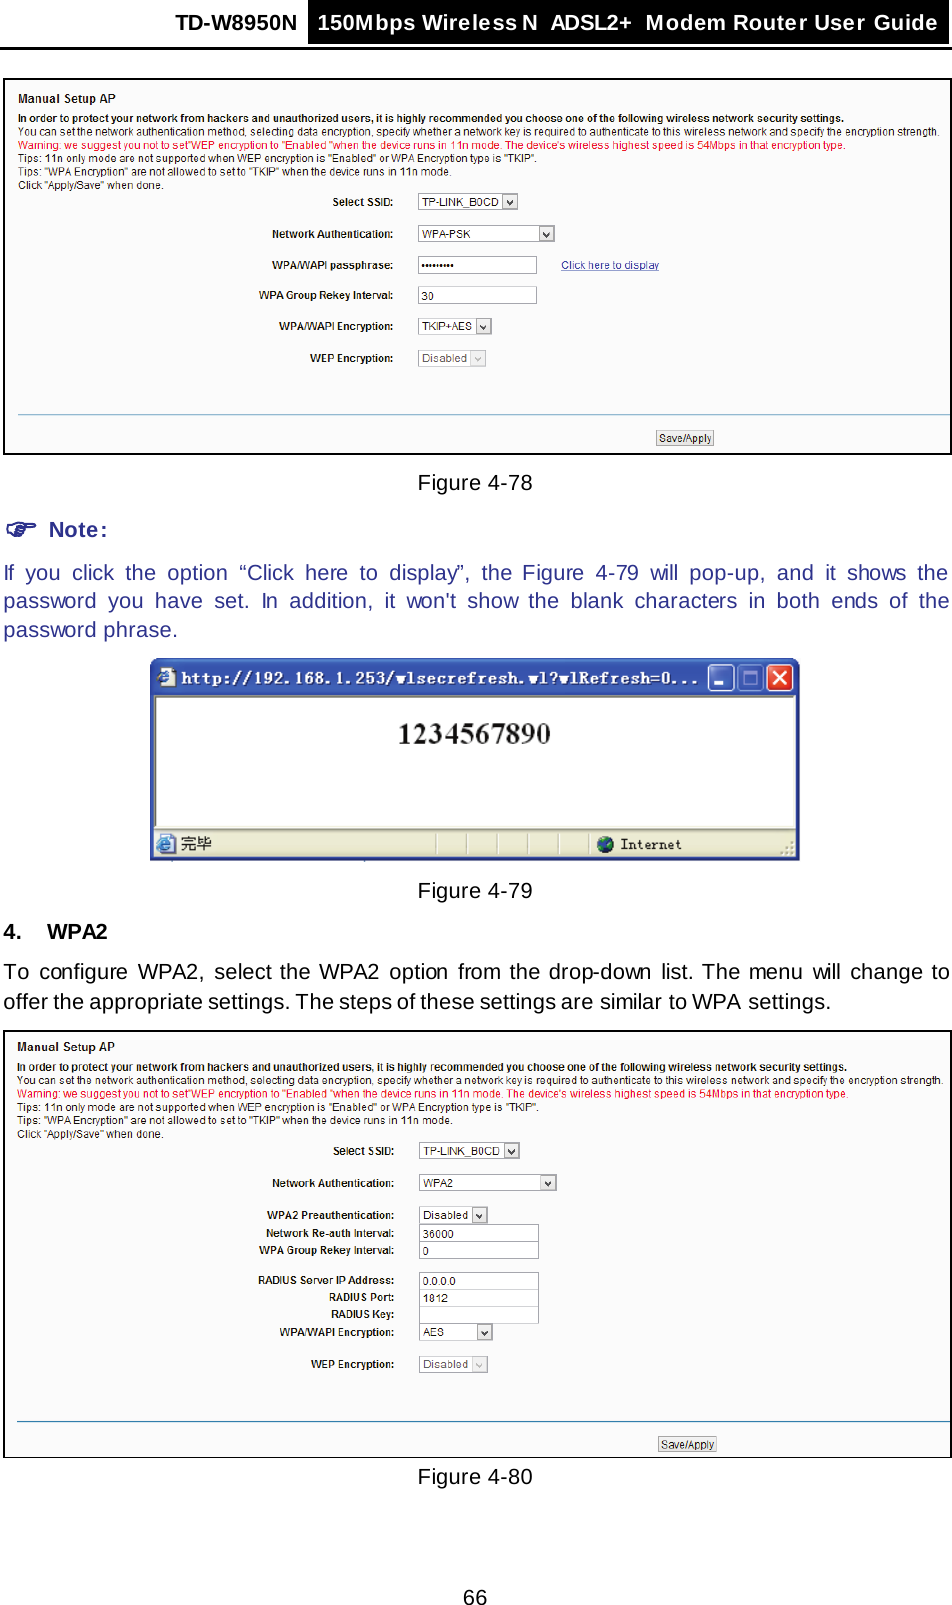 TD-W8950N 150Mbps Wireless N  ADSL2+ Modem Router User Guide  66  Figure 4-78  Note: If you click the option “Click  here to display”,  the  Figure  4-79 will pop-up,  and it shows the password you have set. In addition, it won&apos;t show the blank characters in both ends of the password phrase.  Figure 4-79 4. WPA2 To configure WPA2,  select the WPA2 option from the drop-down list. The menu will change to offer the appropriate settings. The steps of these settings are similar to WPA settings.  Figure 4-80 